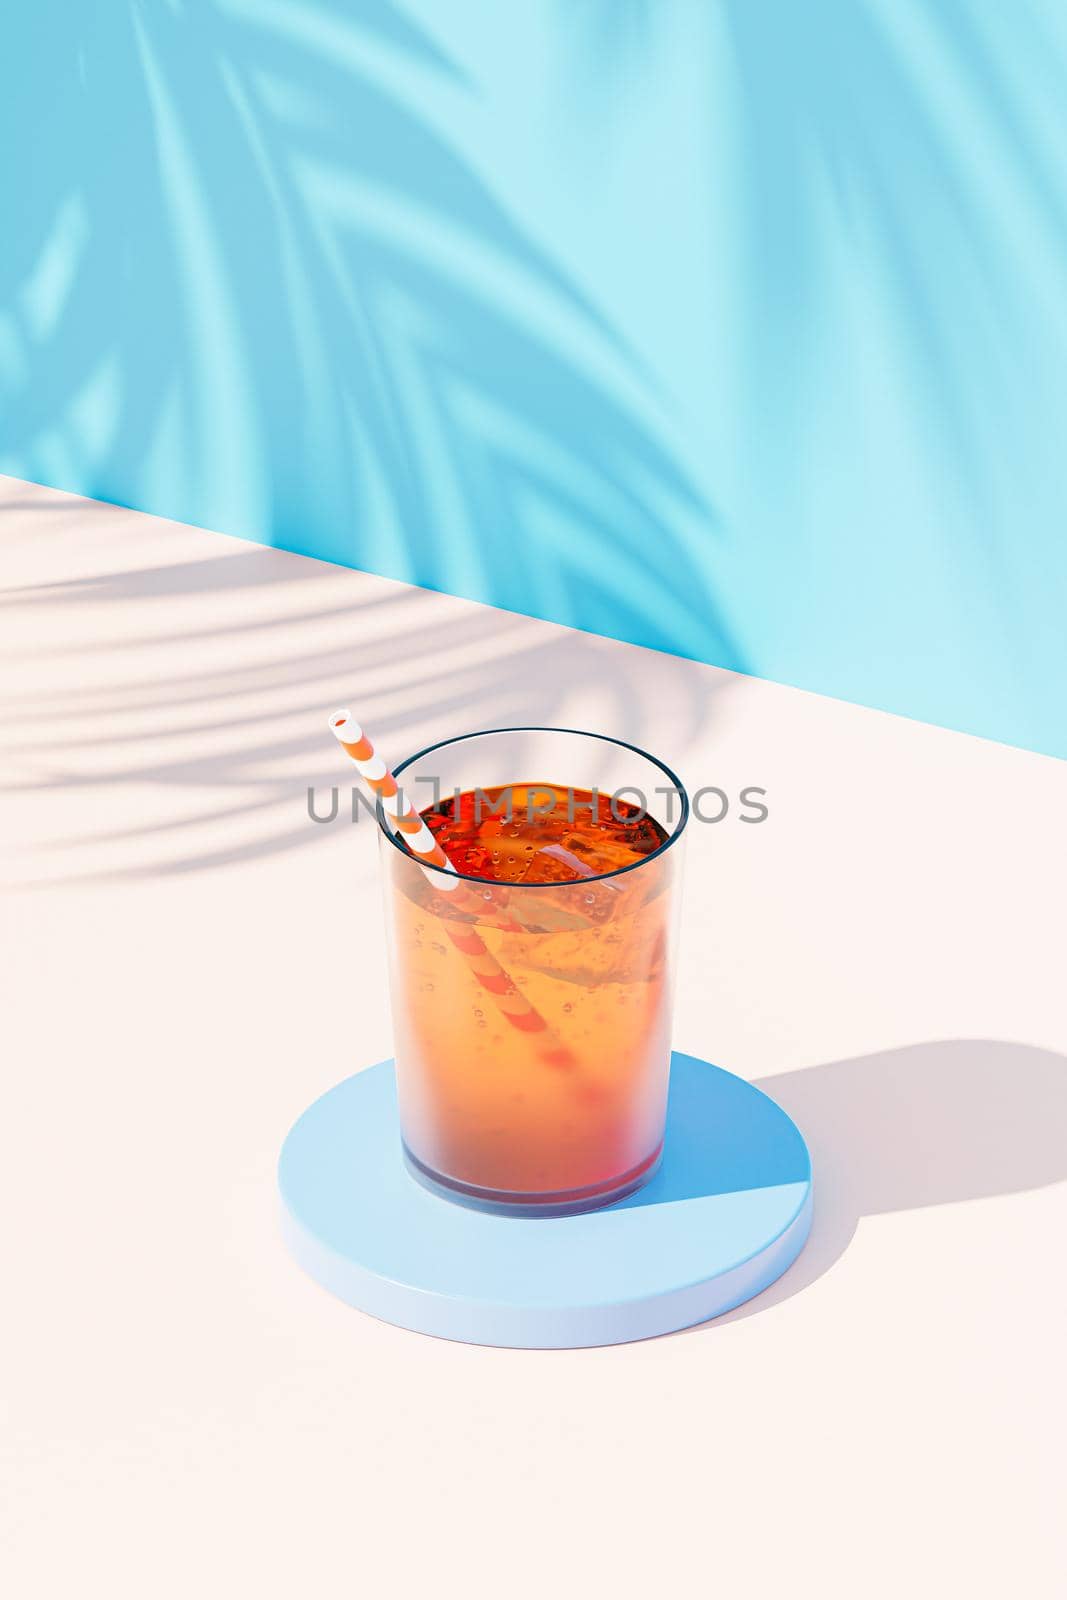 Cocktail drink in glass with ice and straw on blue background with tropical leaf shadows, 3d render